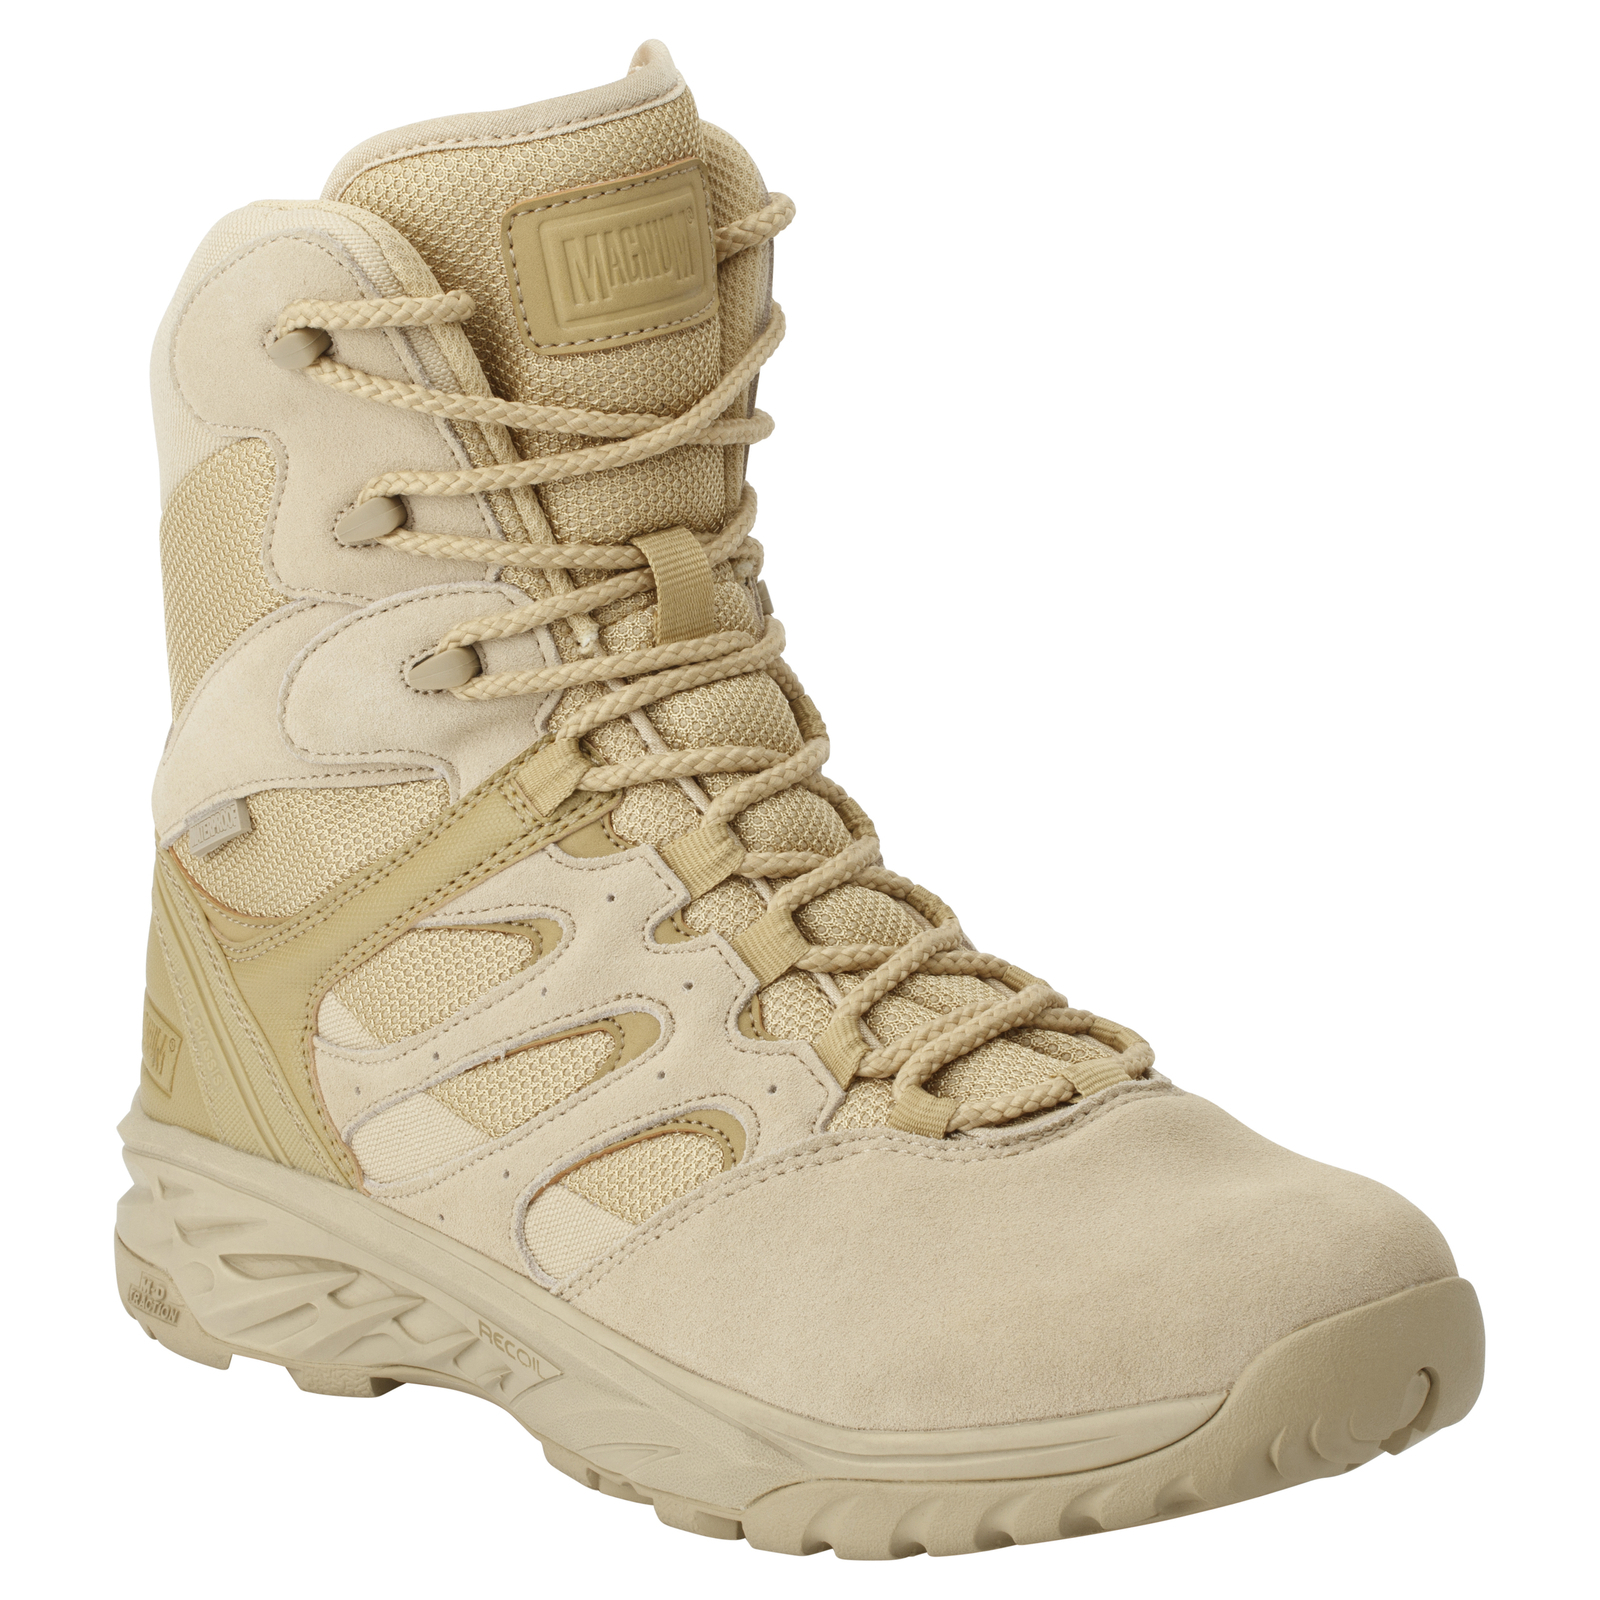 Magnum Boots Wild-Fire Tactical 8.0 inches - Side Zip - Waterproof I ...